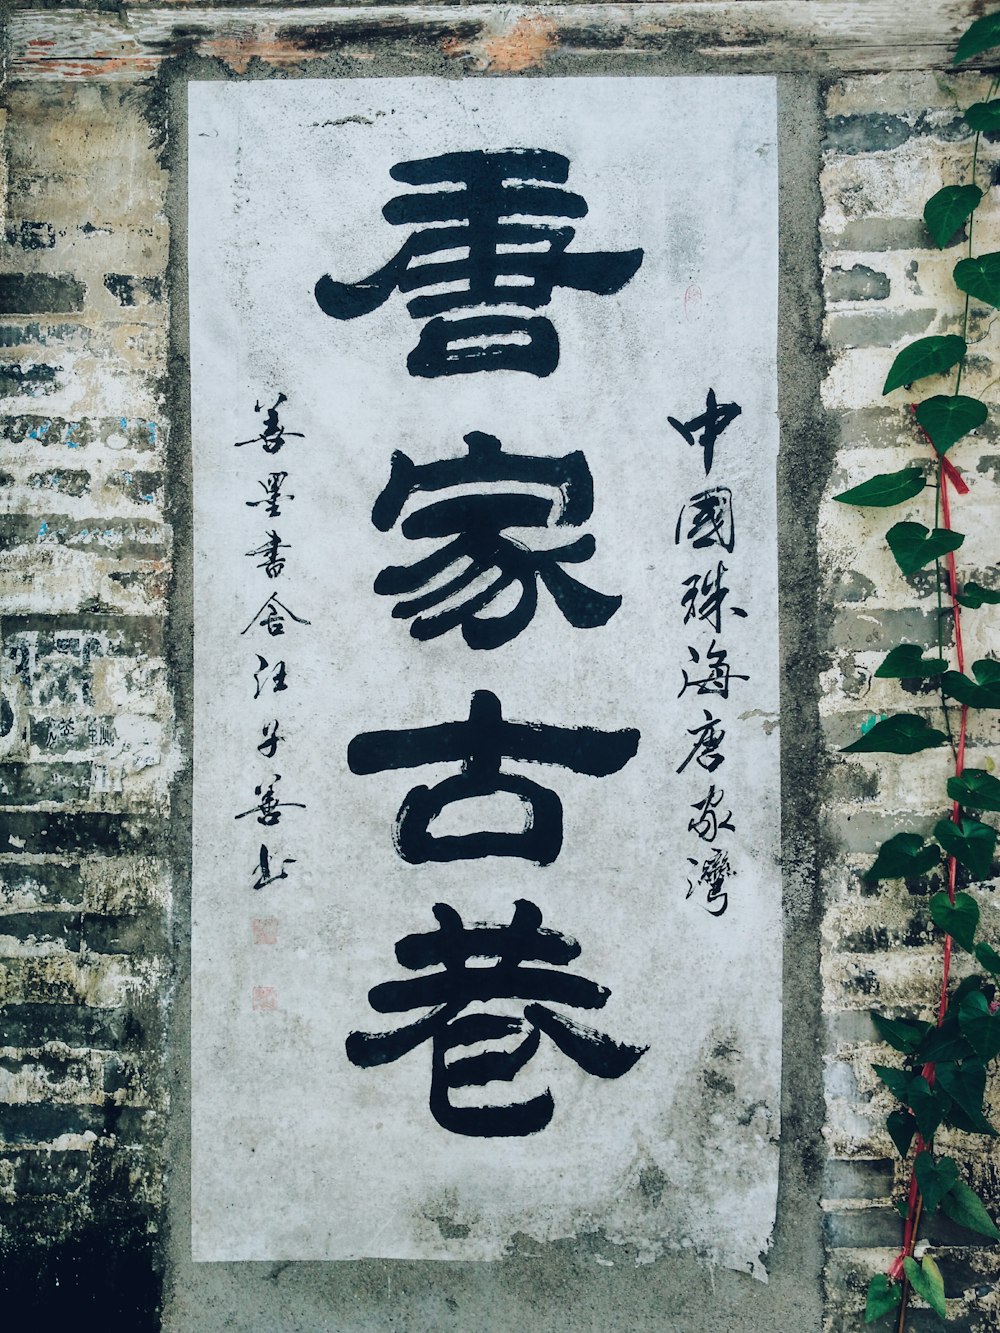 Japanese Writing Pictures | Download Free Images on Unsplash